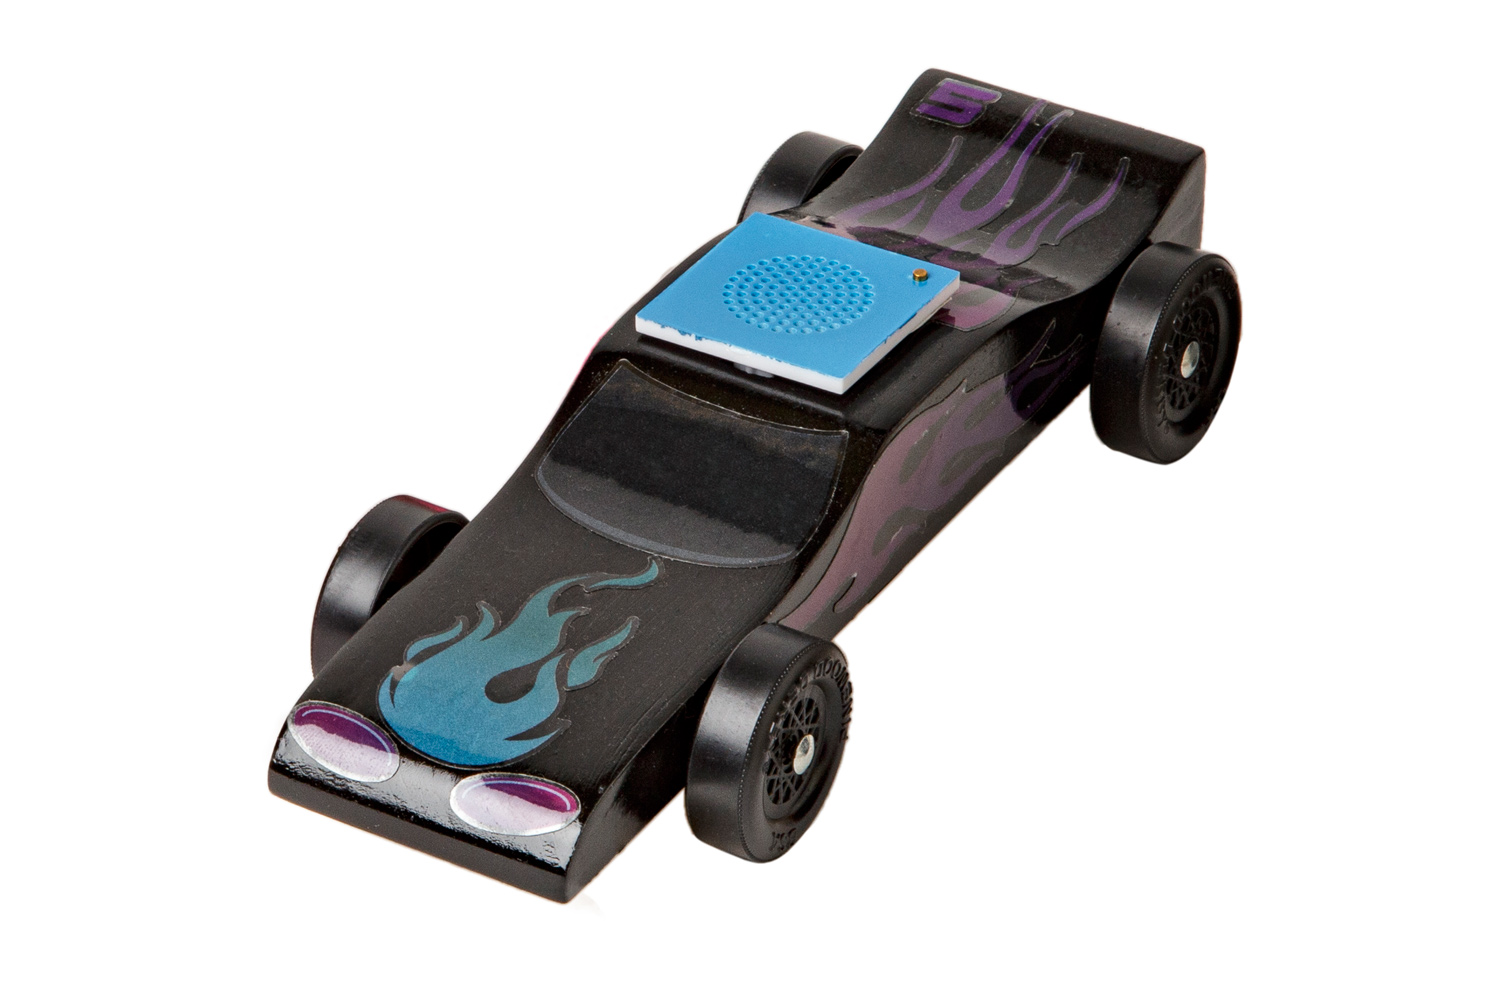 Official Pinewood Derby Car Kit - Includes Wood Block, Wheels, and 4  Lead-Free Nail-Type Axles